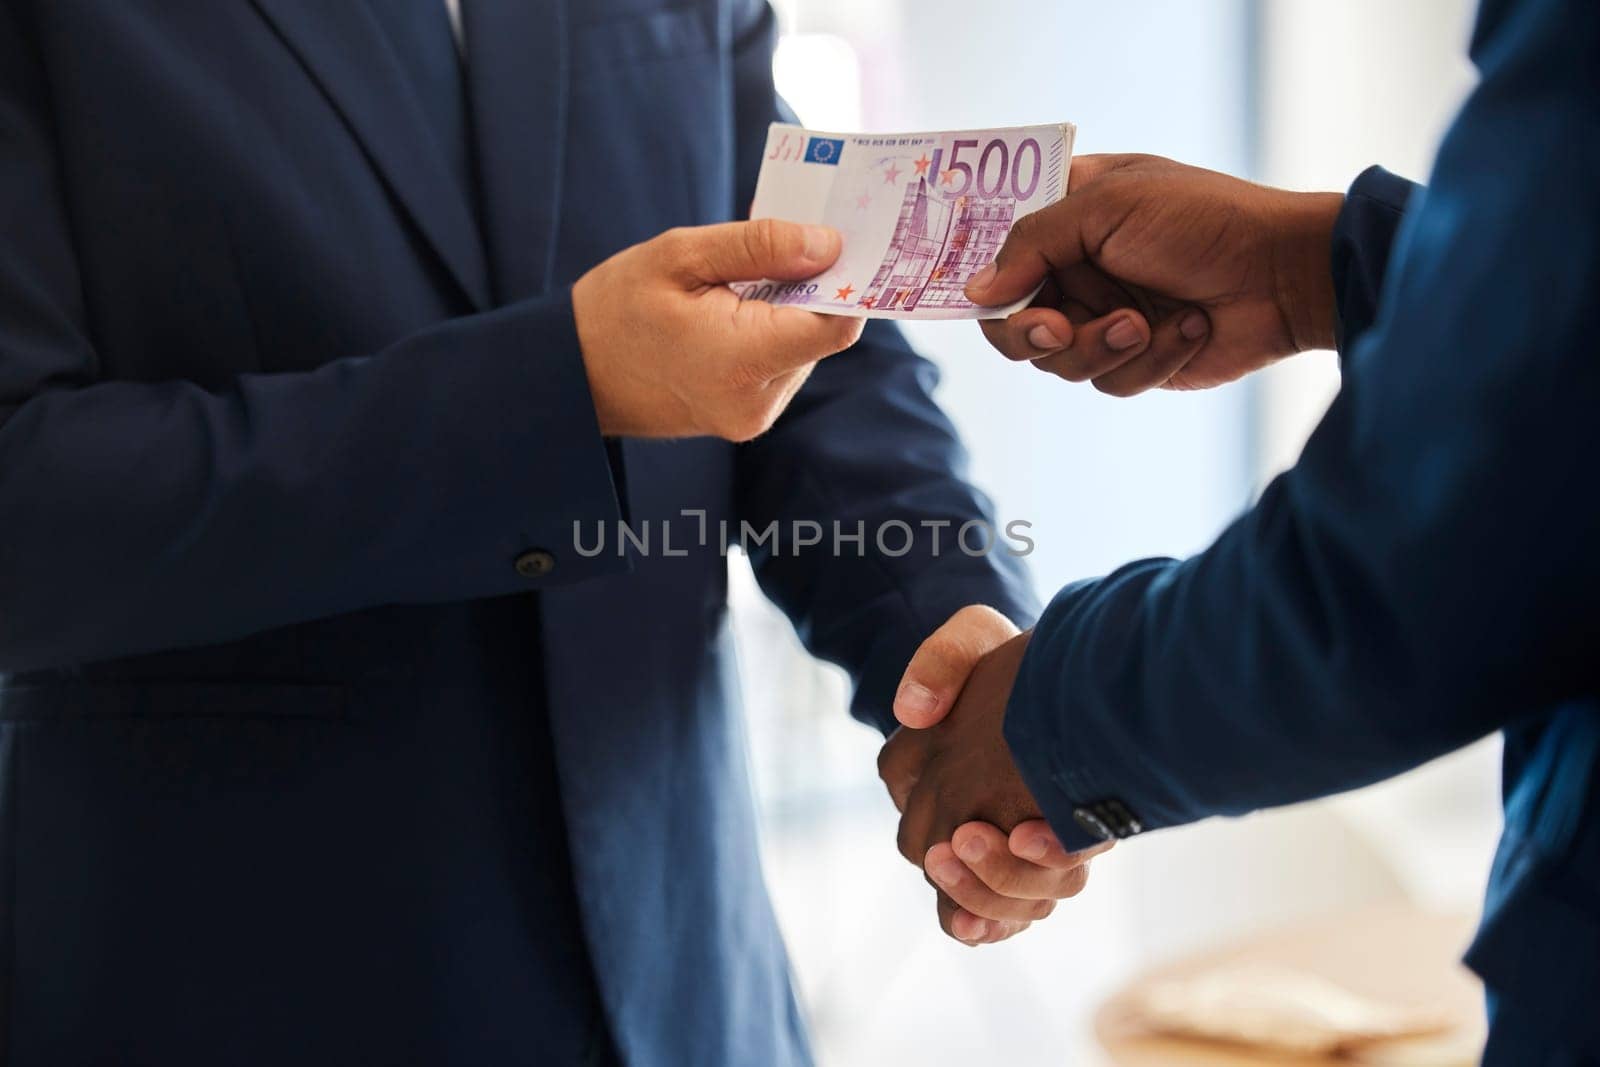 Business fraud, corruption handshake and money deal, scam and criminal giving euro notes, bribery payment and illegal trading offer. Bad politician shaking hands for crime, cash and money laundering.